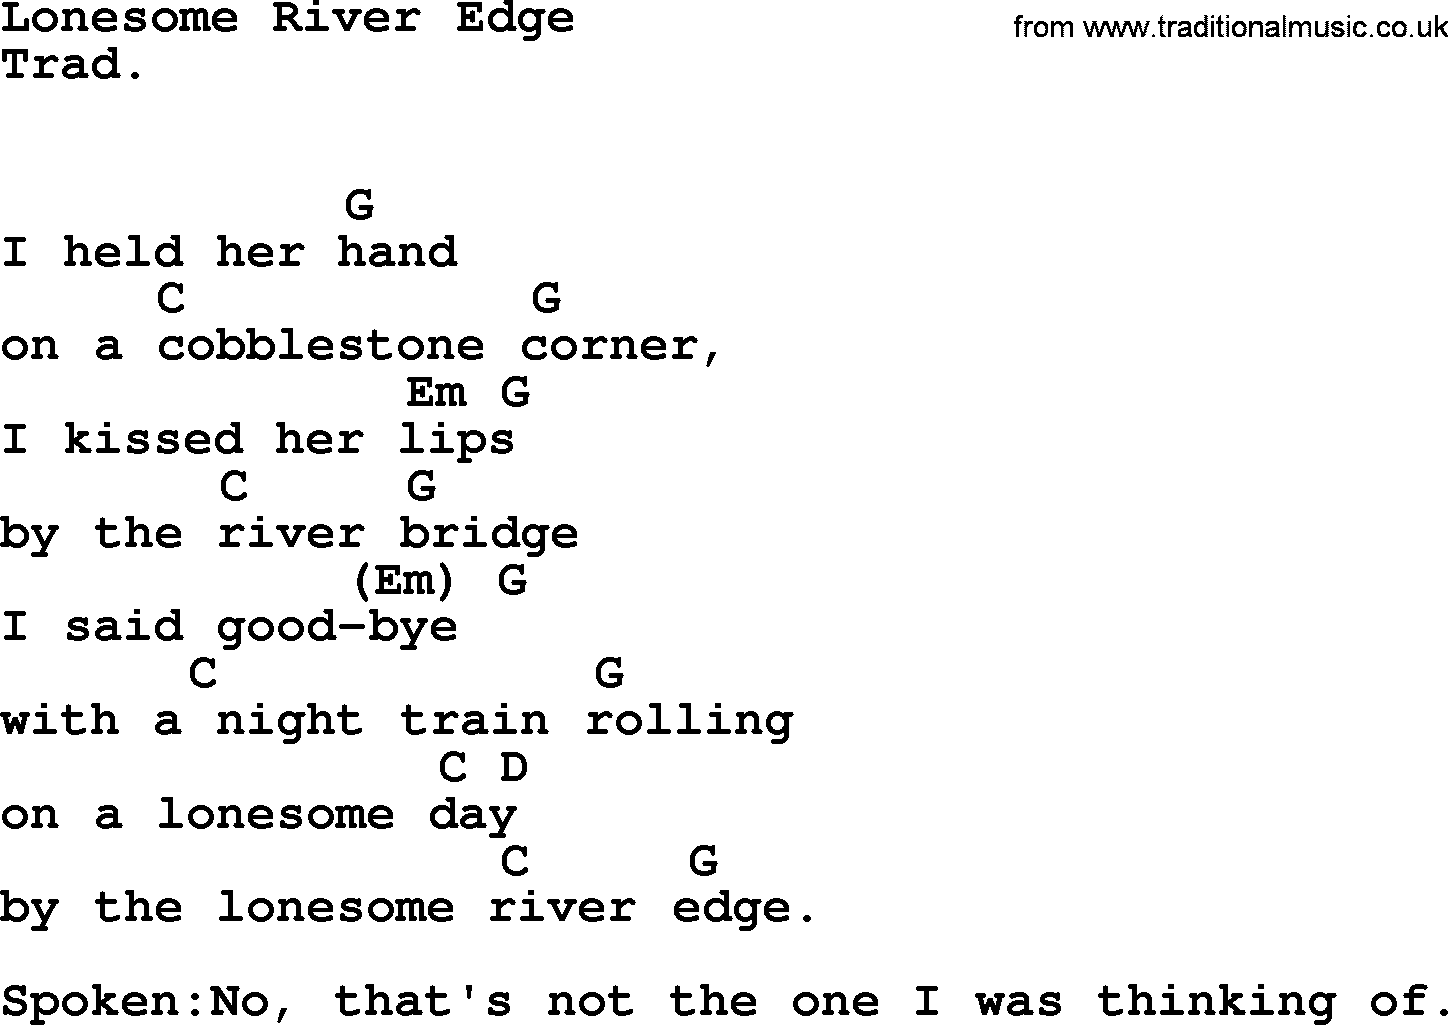 Bob Dylan song, lyrics with chords - Lonesome River Edge